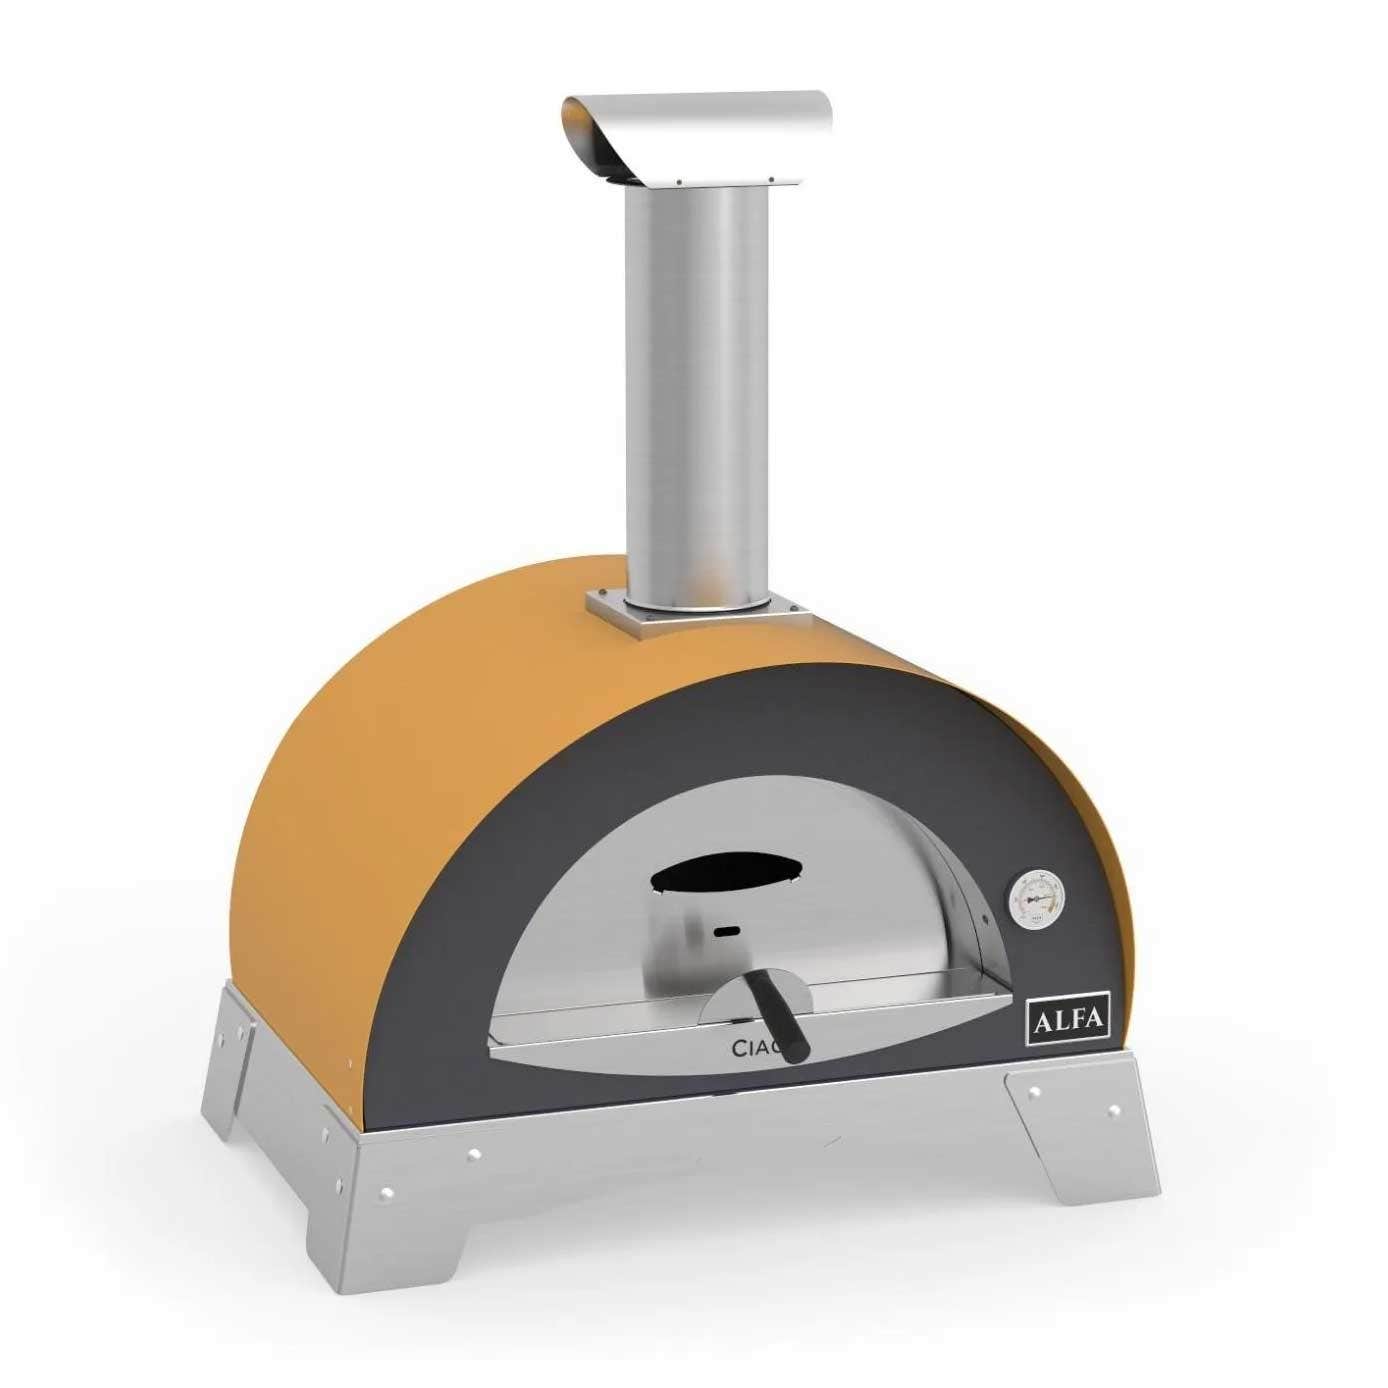 https://www.atbbq.com/cdn/shop/files/alfa-ciao-wood-fired-outdoor-pizza-oven-pizza-makers-ovens-40052718174485.jpg?v=1693576991